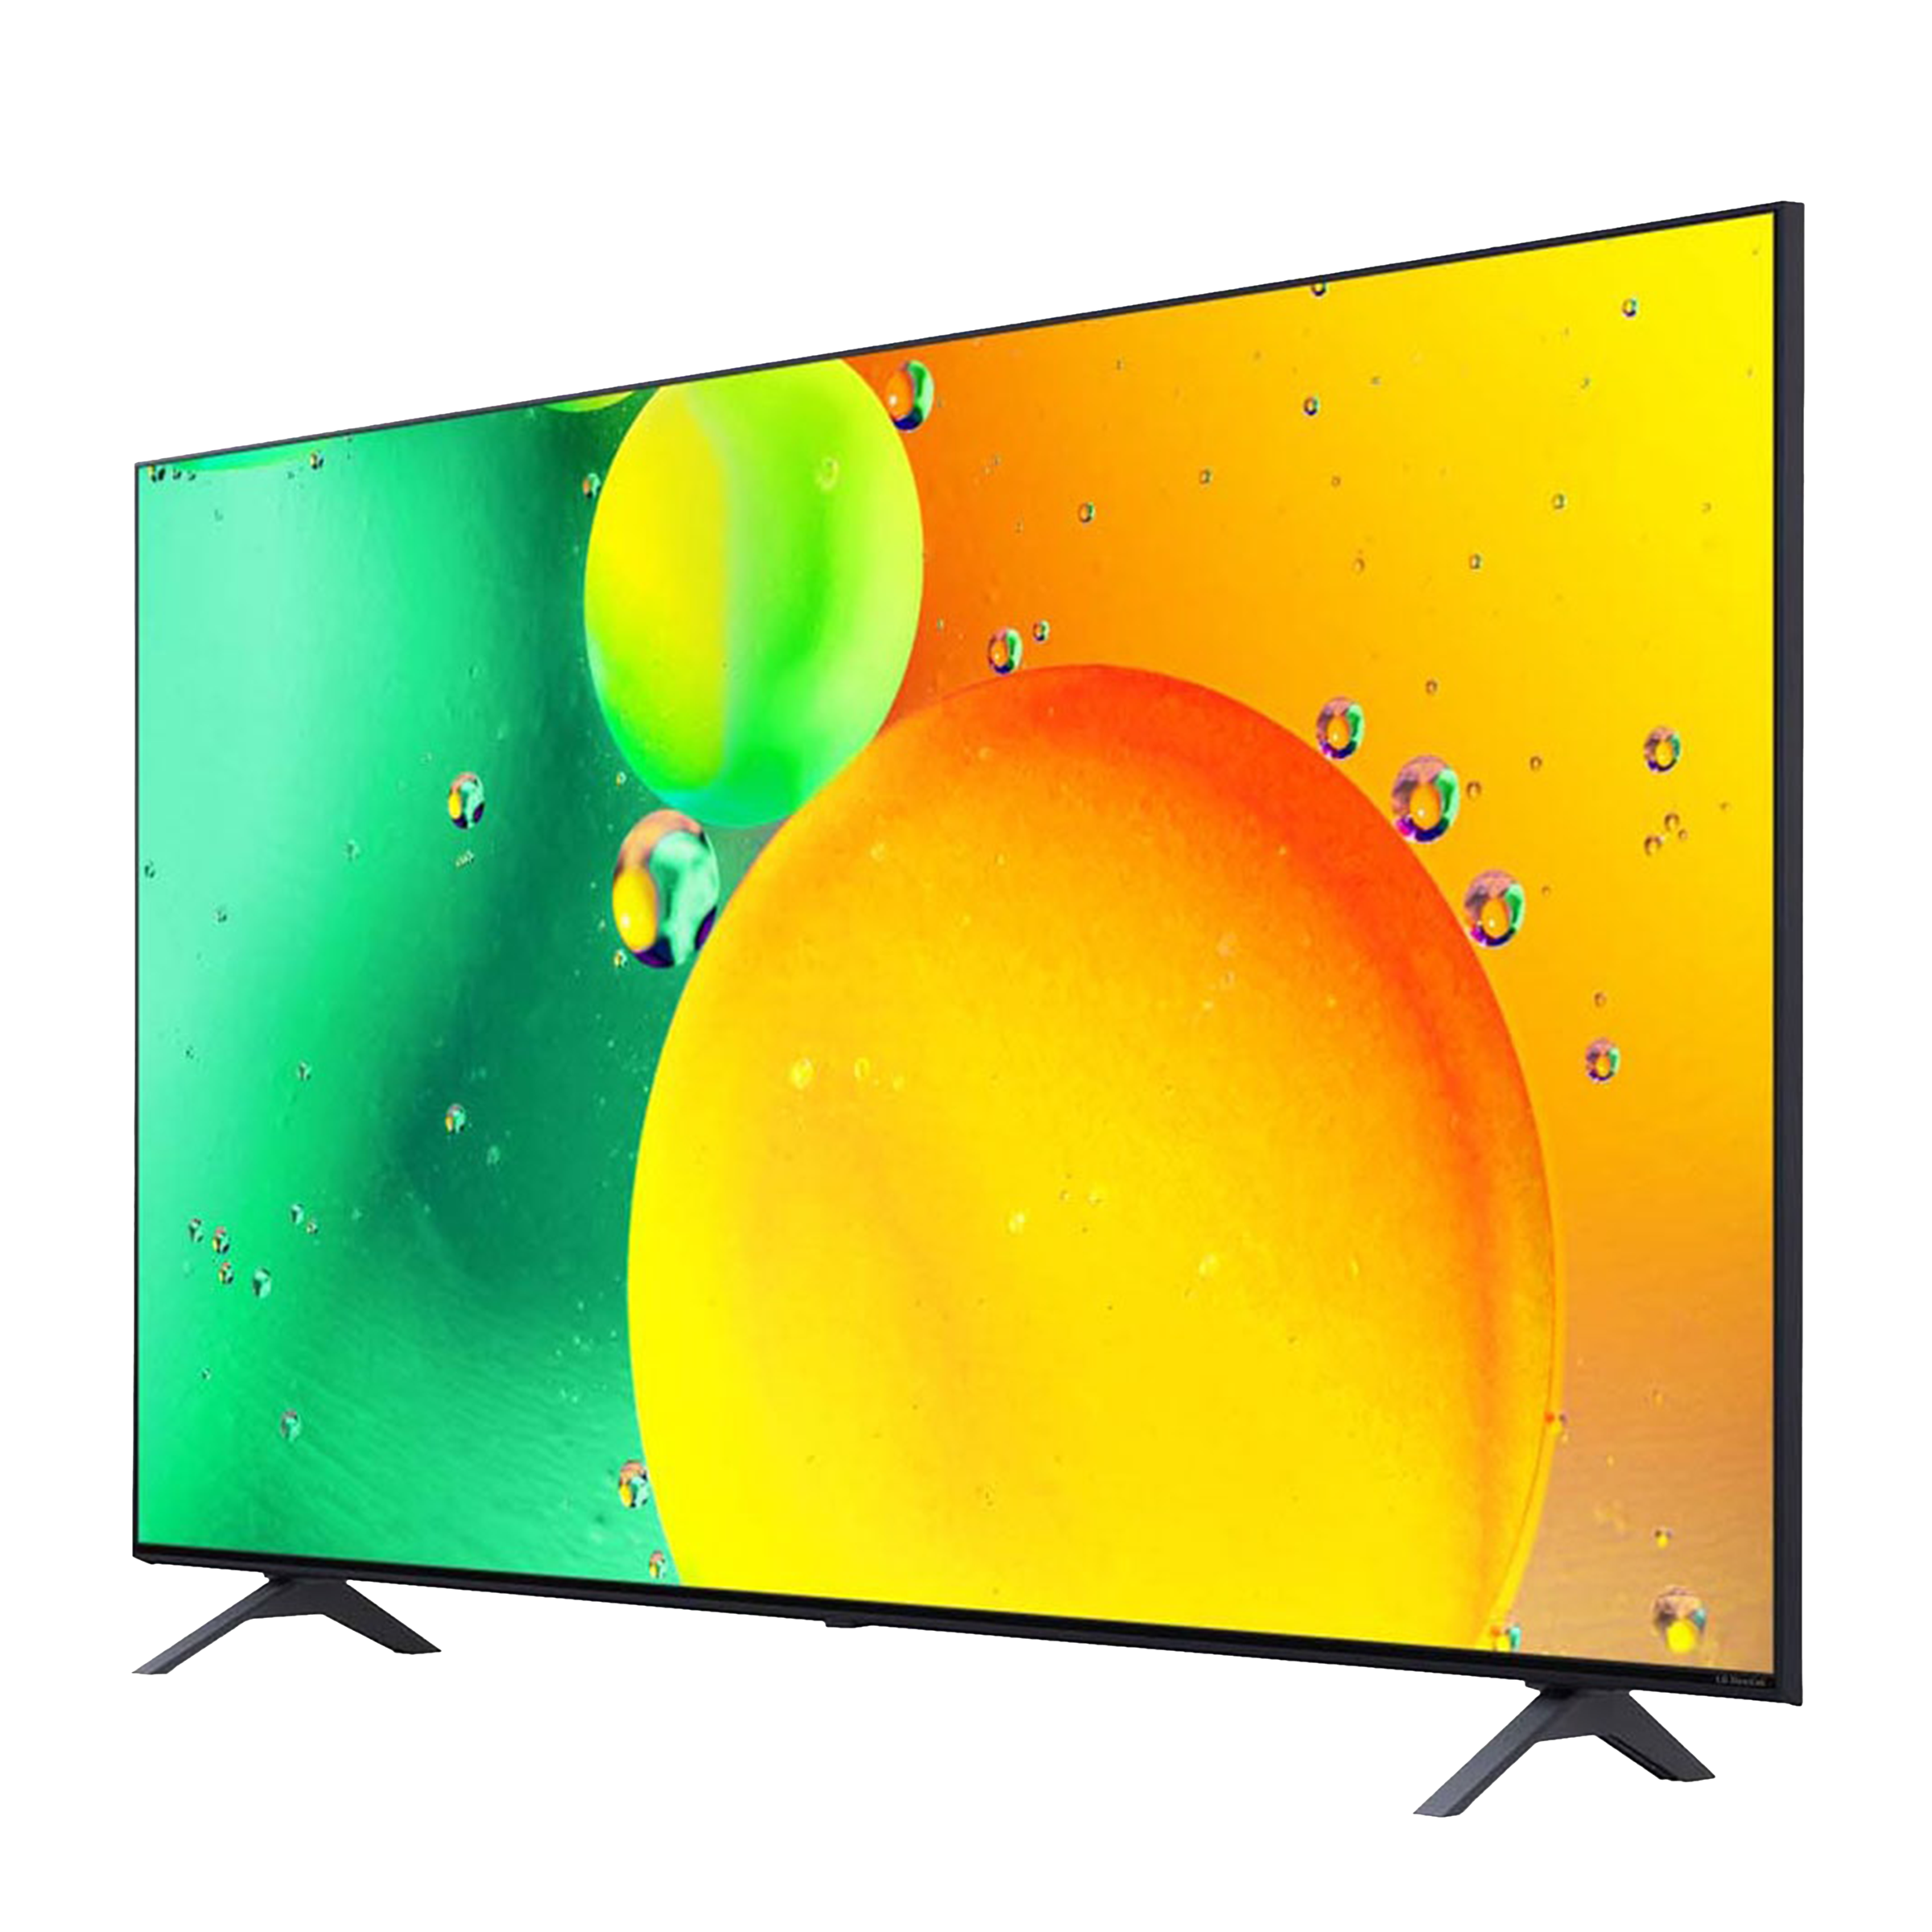 Buy Lg Nano75 164 Cm 65 Inch 4k Ultra Hd Nano Cell Webos Tv With Voice Assistance 2022 Model